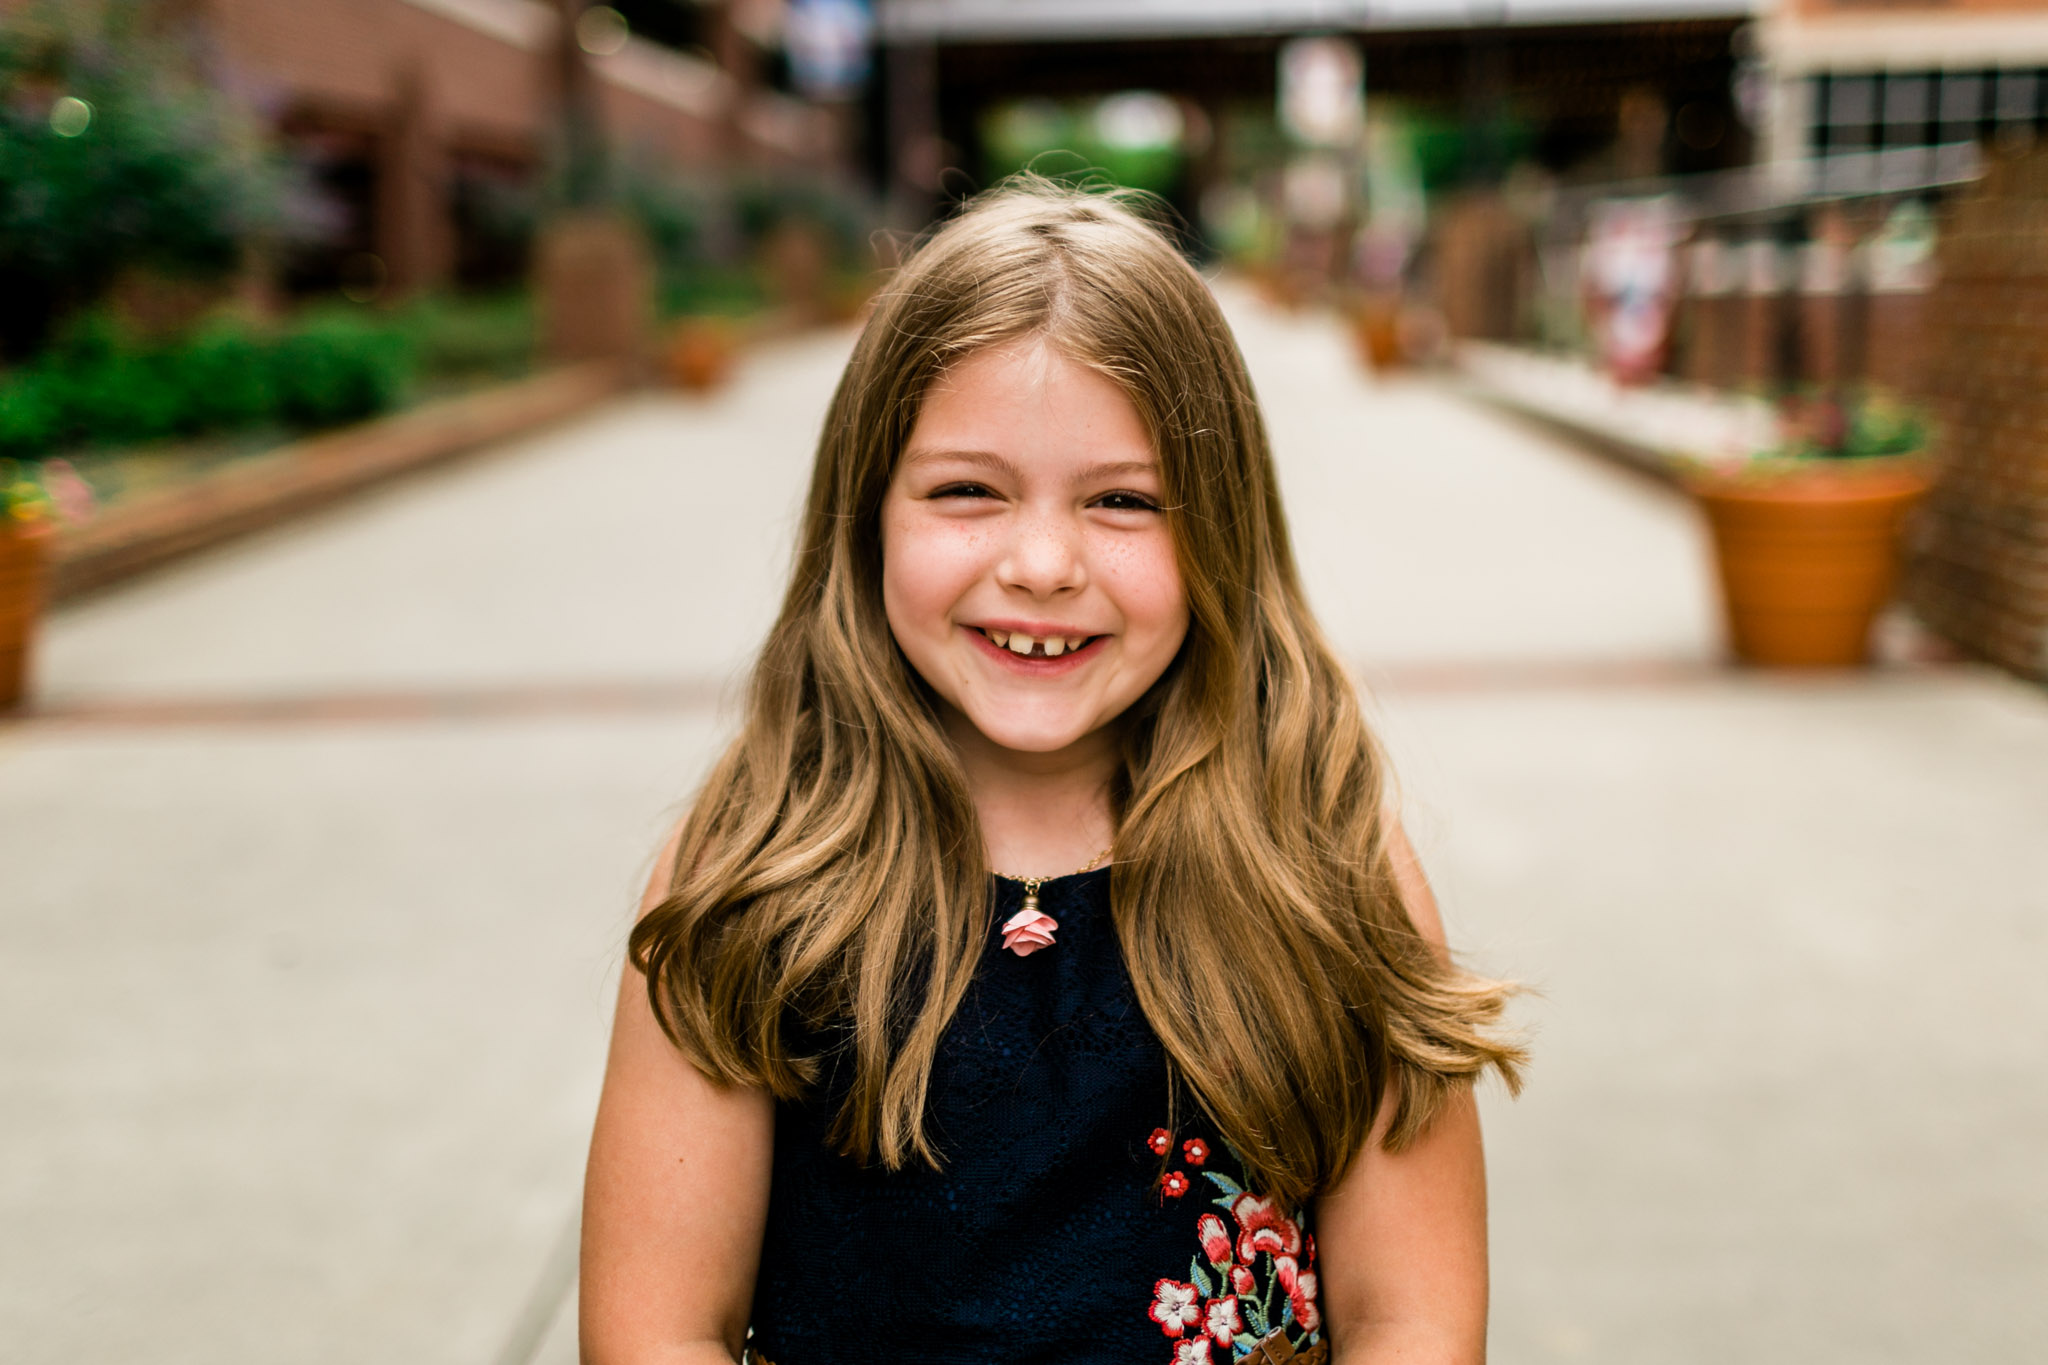 Durham Family Photographer | By G. Lin Photography | Portrait of young girl smiling at camera